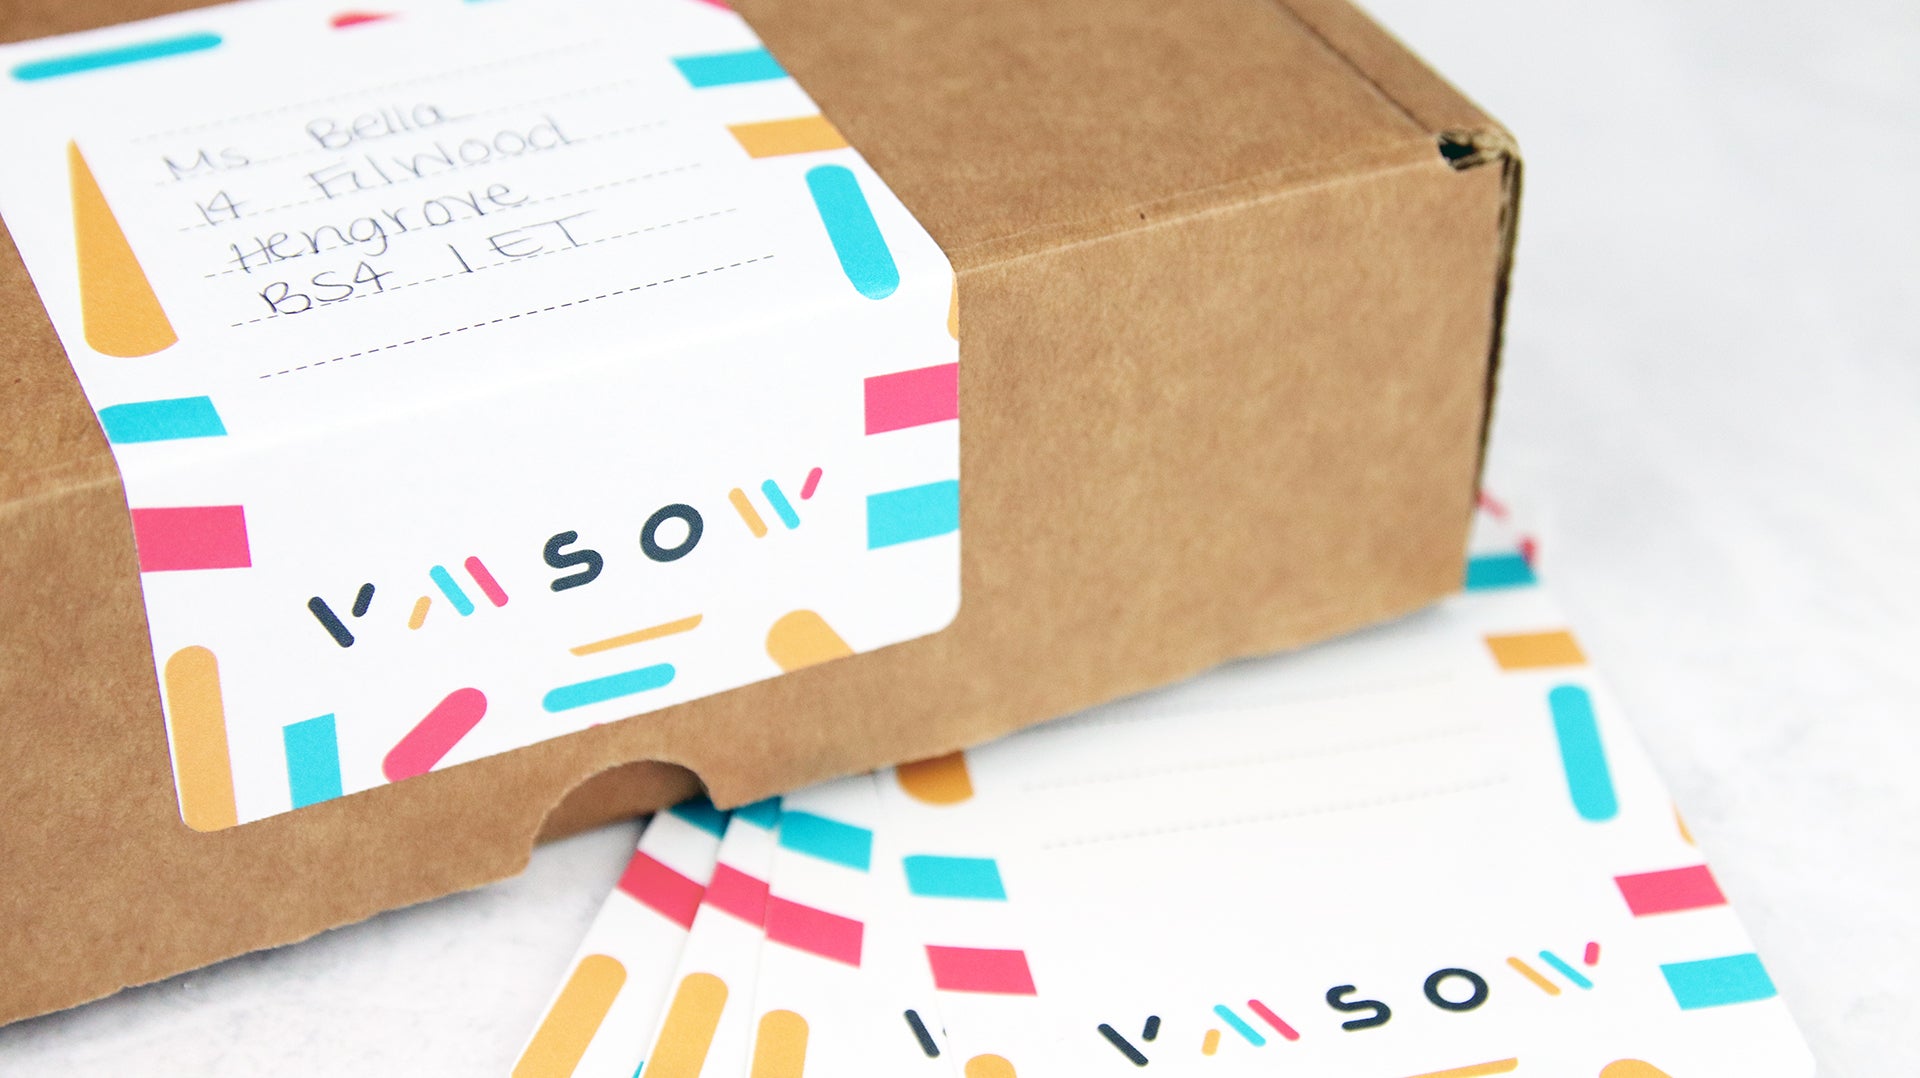 Biodegradable paper sheet labels with rounded corners applied to a cardboard box used as an address label